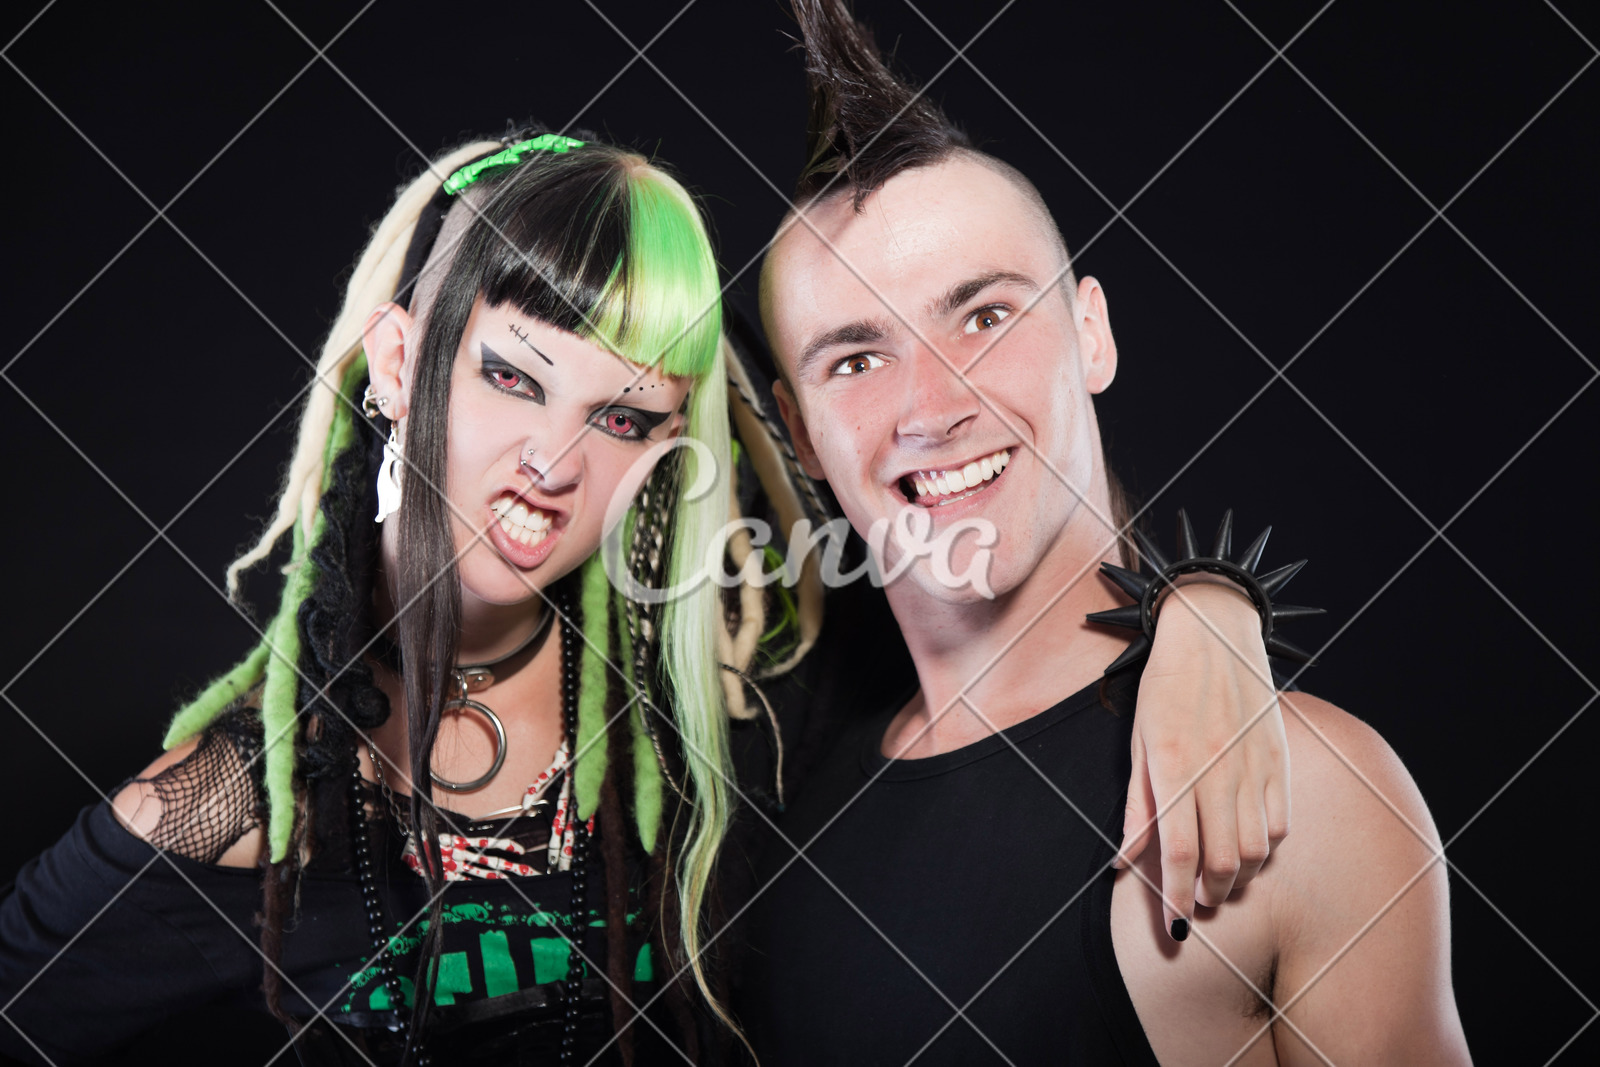 Couple Of Cyber Punk Girl And Man With Mohawk Haircut